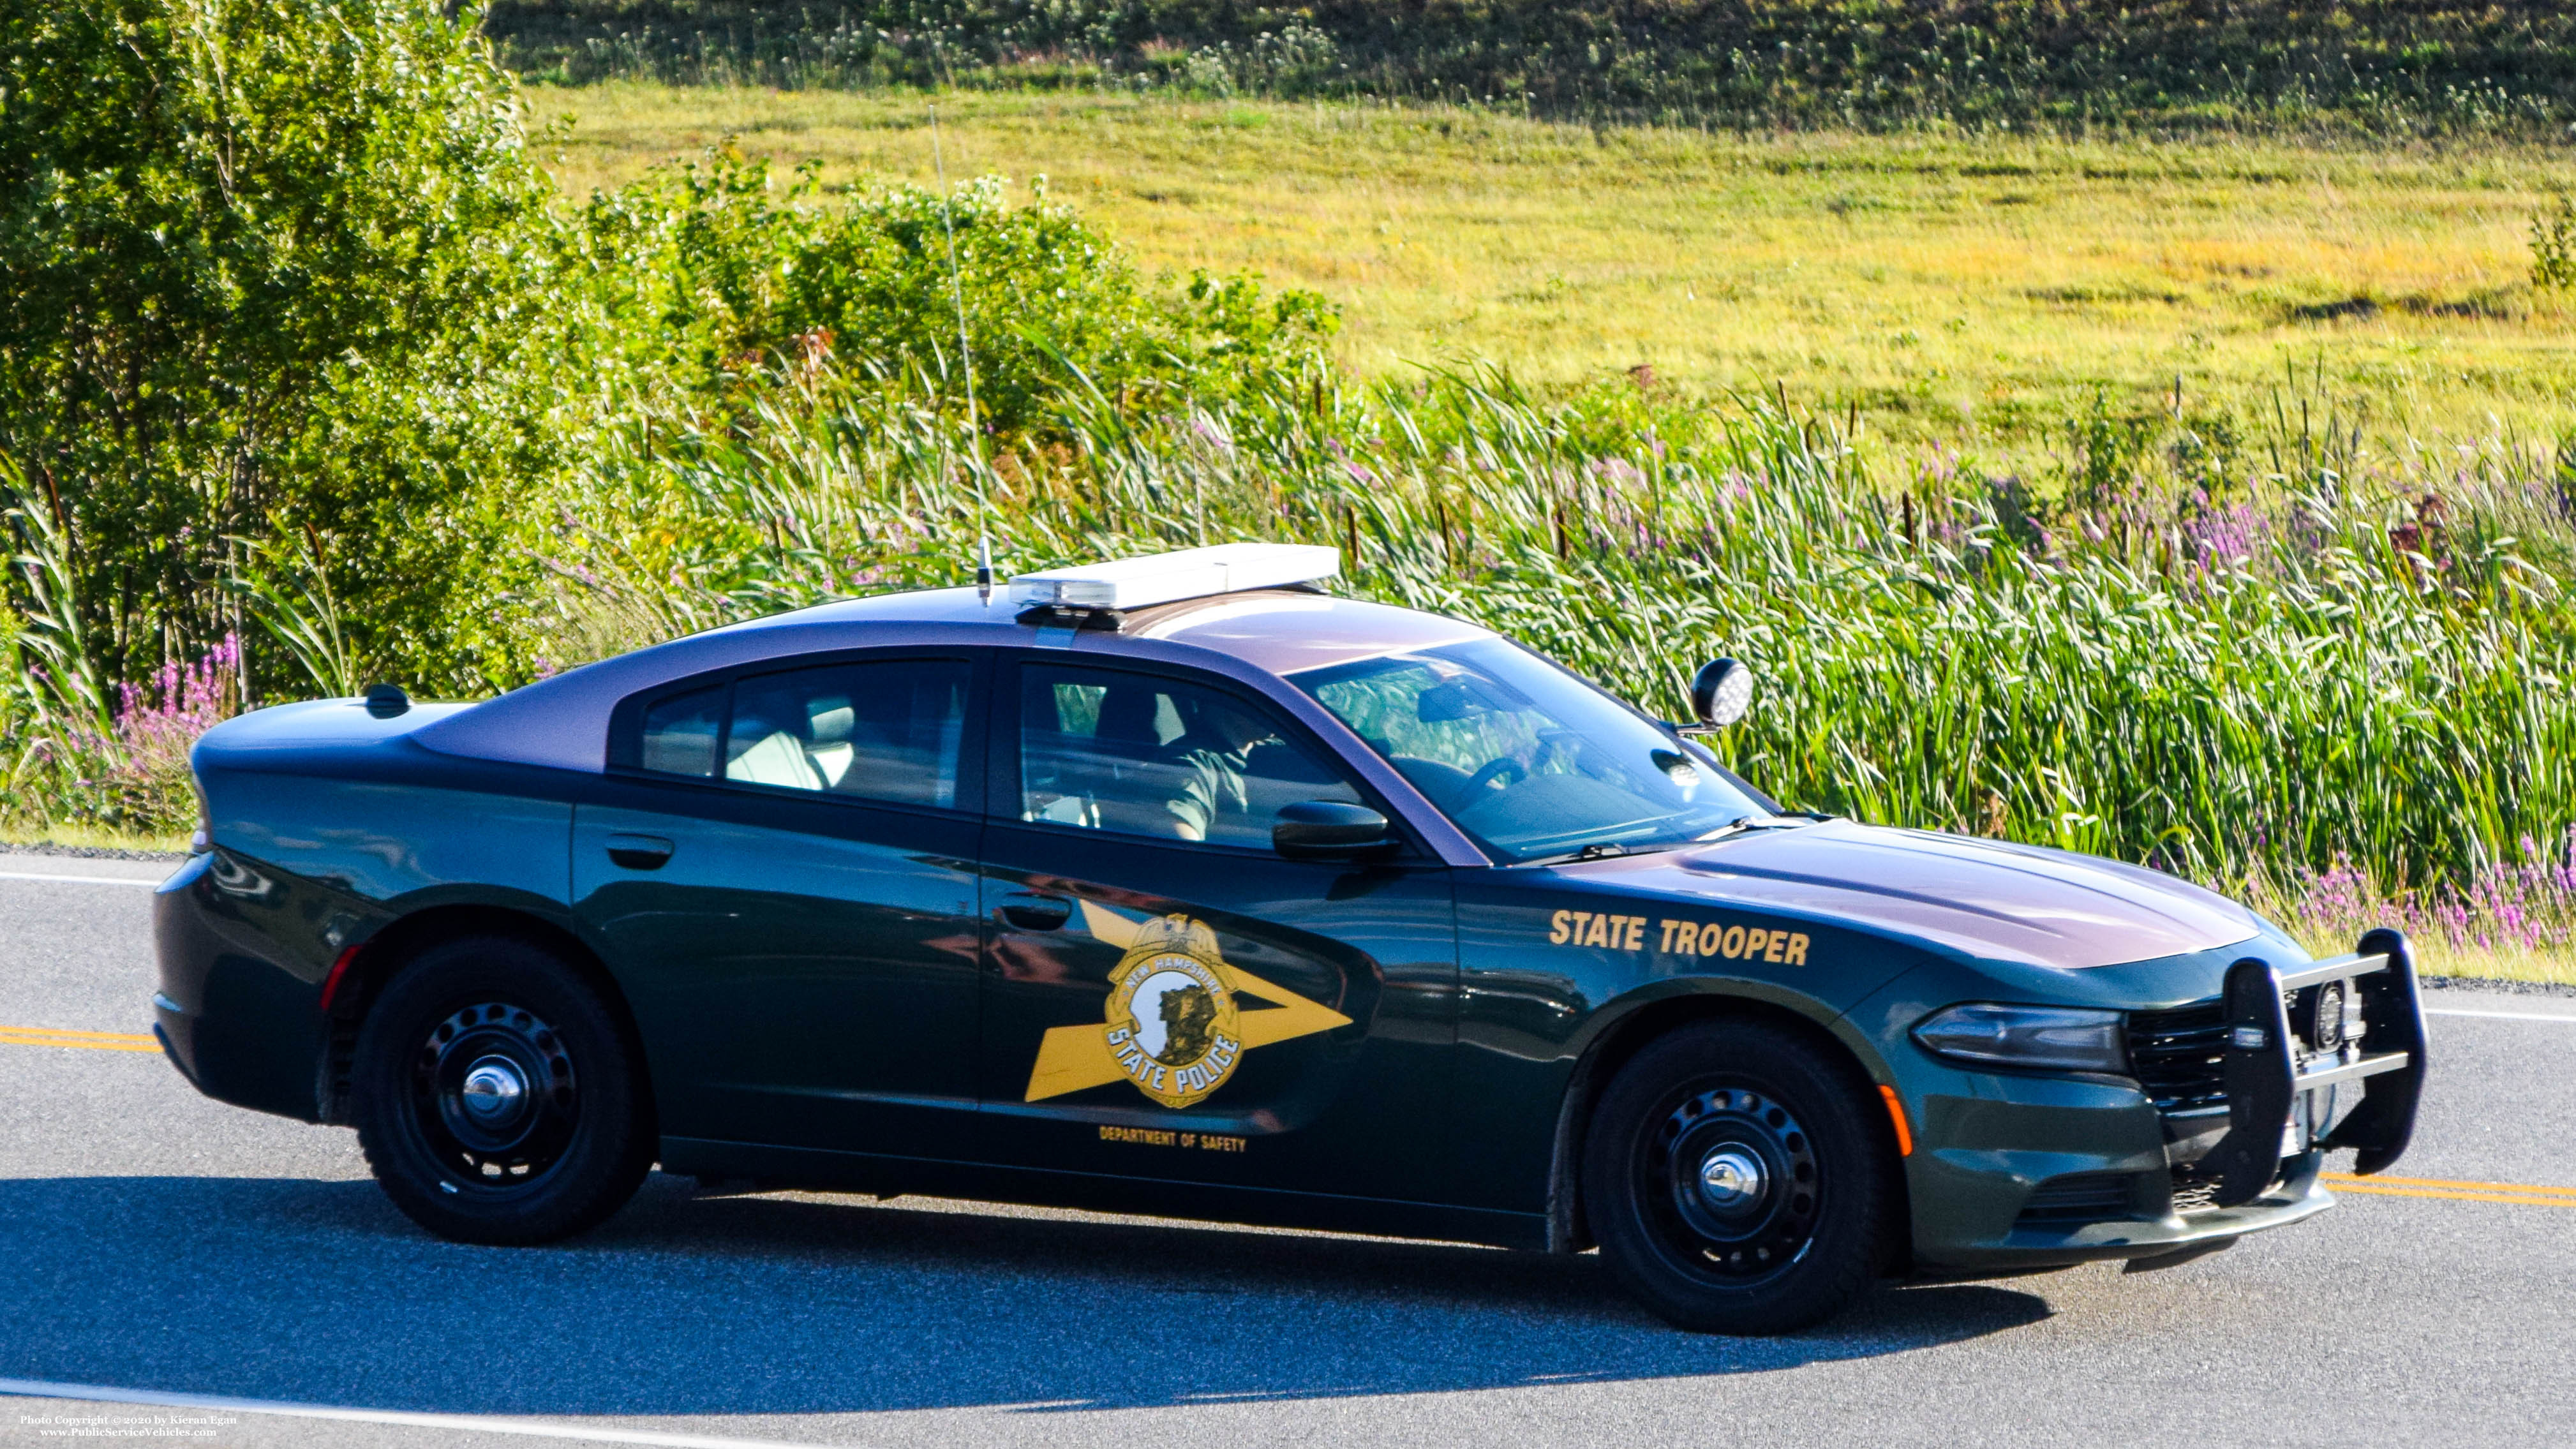 A photo  of New Hampshire State Police
            Cruiser 212, a 2015-2016 Dodge Charger             taken by Kieran Egan